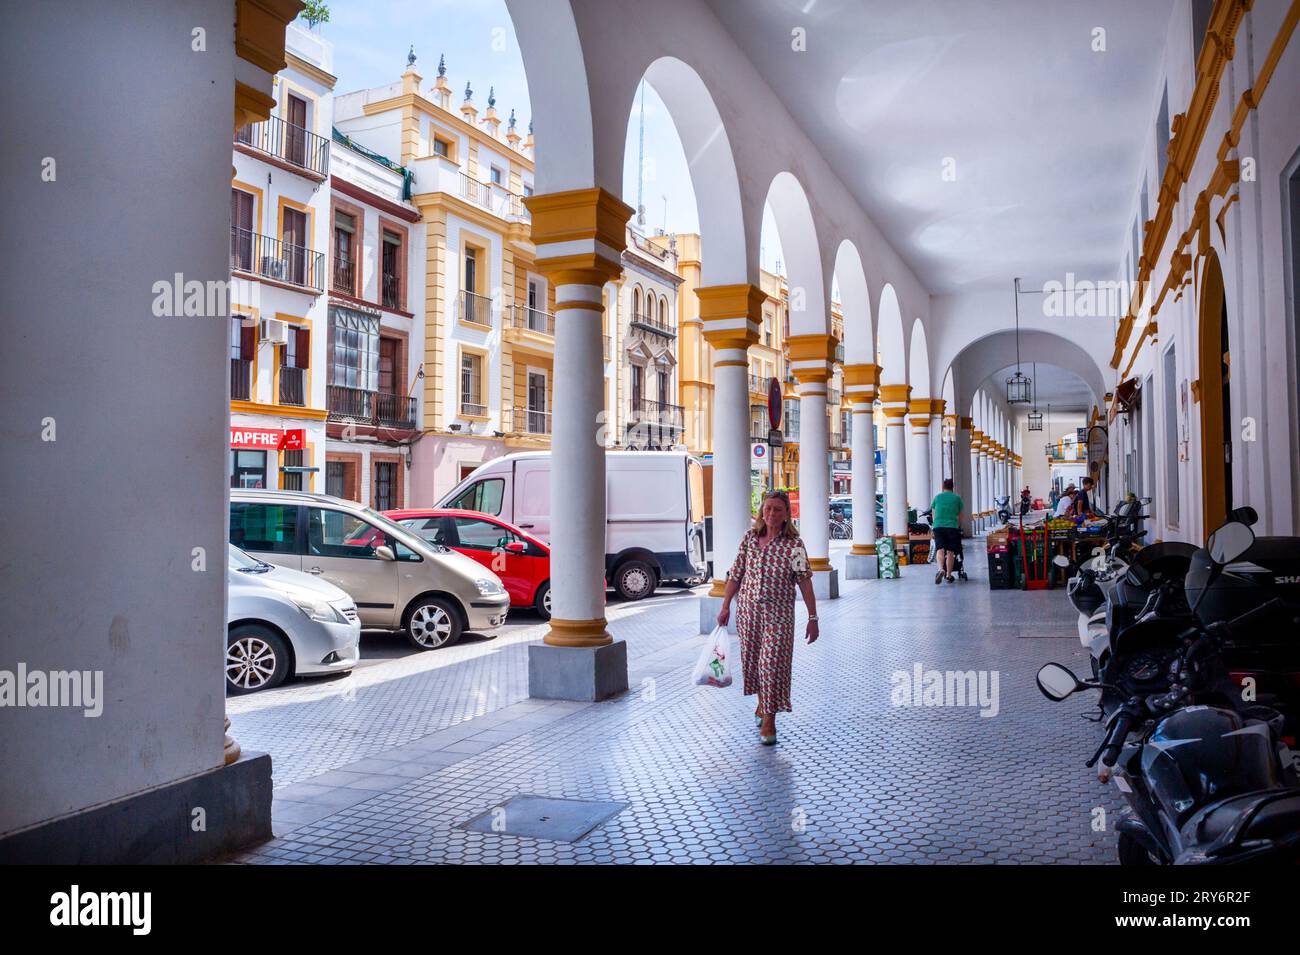 Seville, Spain, Woman Walking,  Outside Street, Arches, Public Food Market, 'El Arenal Market',  in Old Town Center, Stock Photo